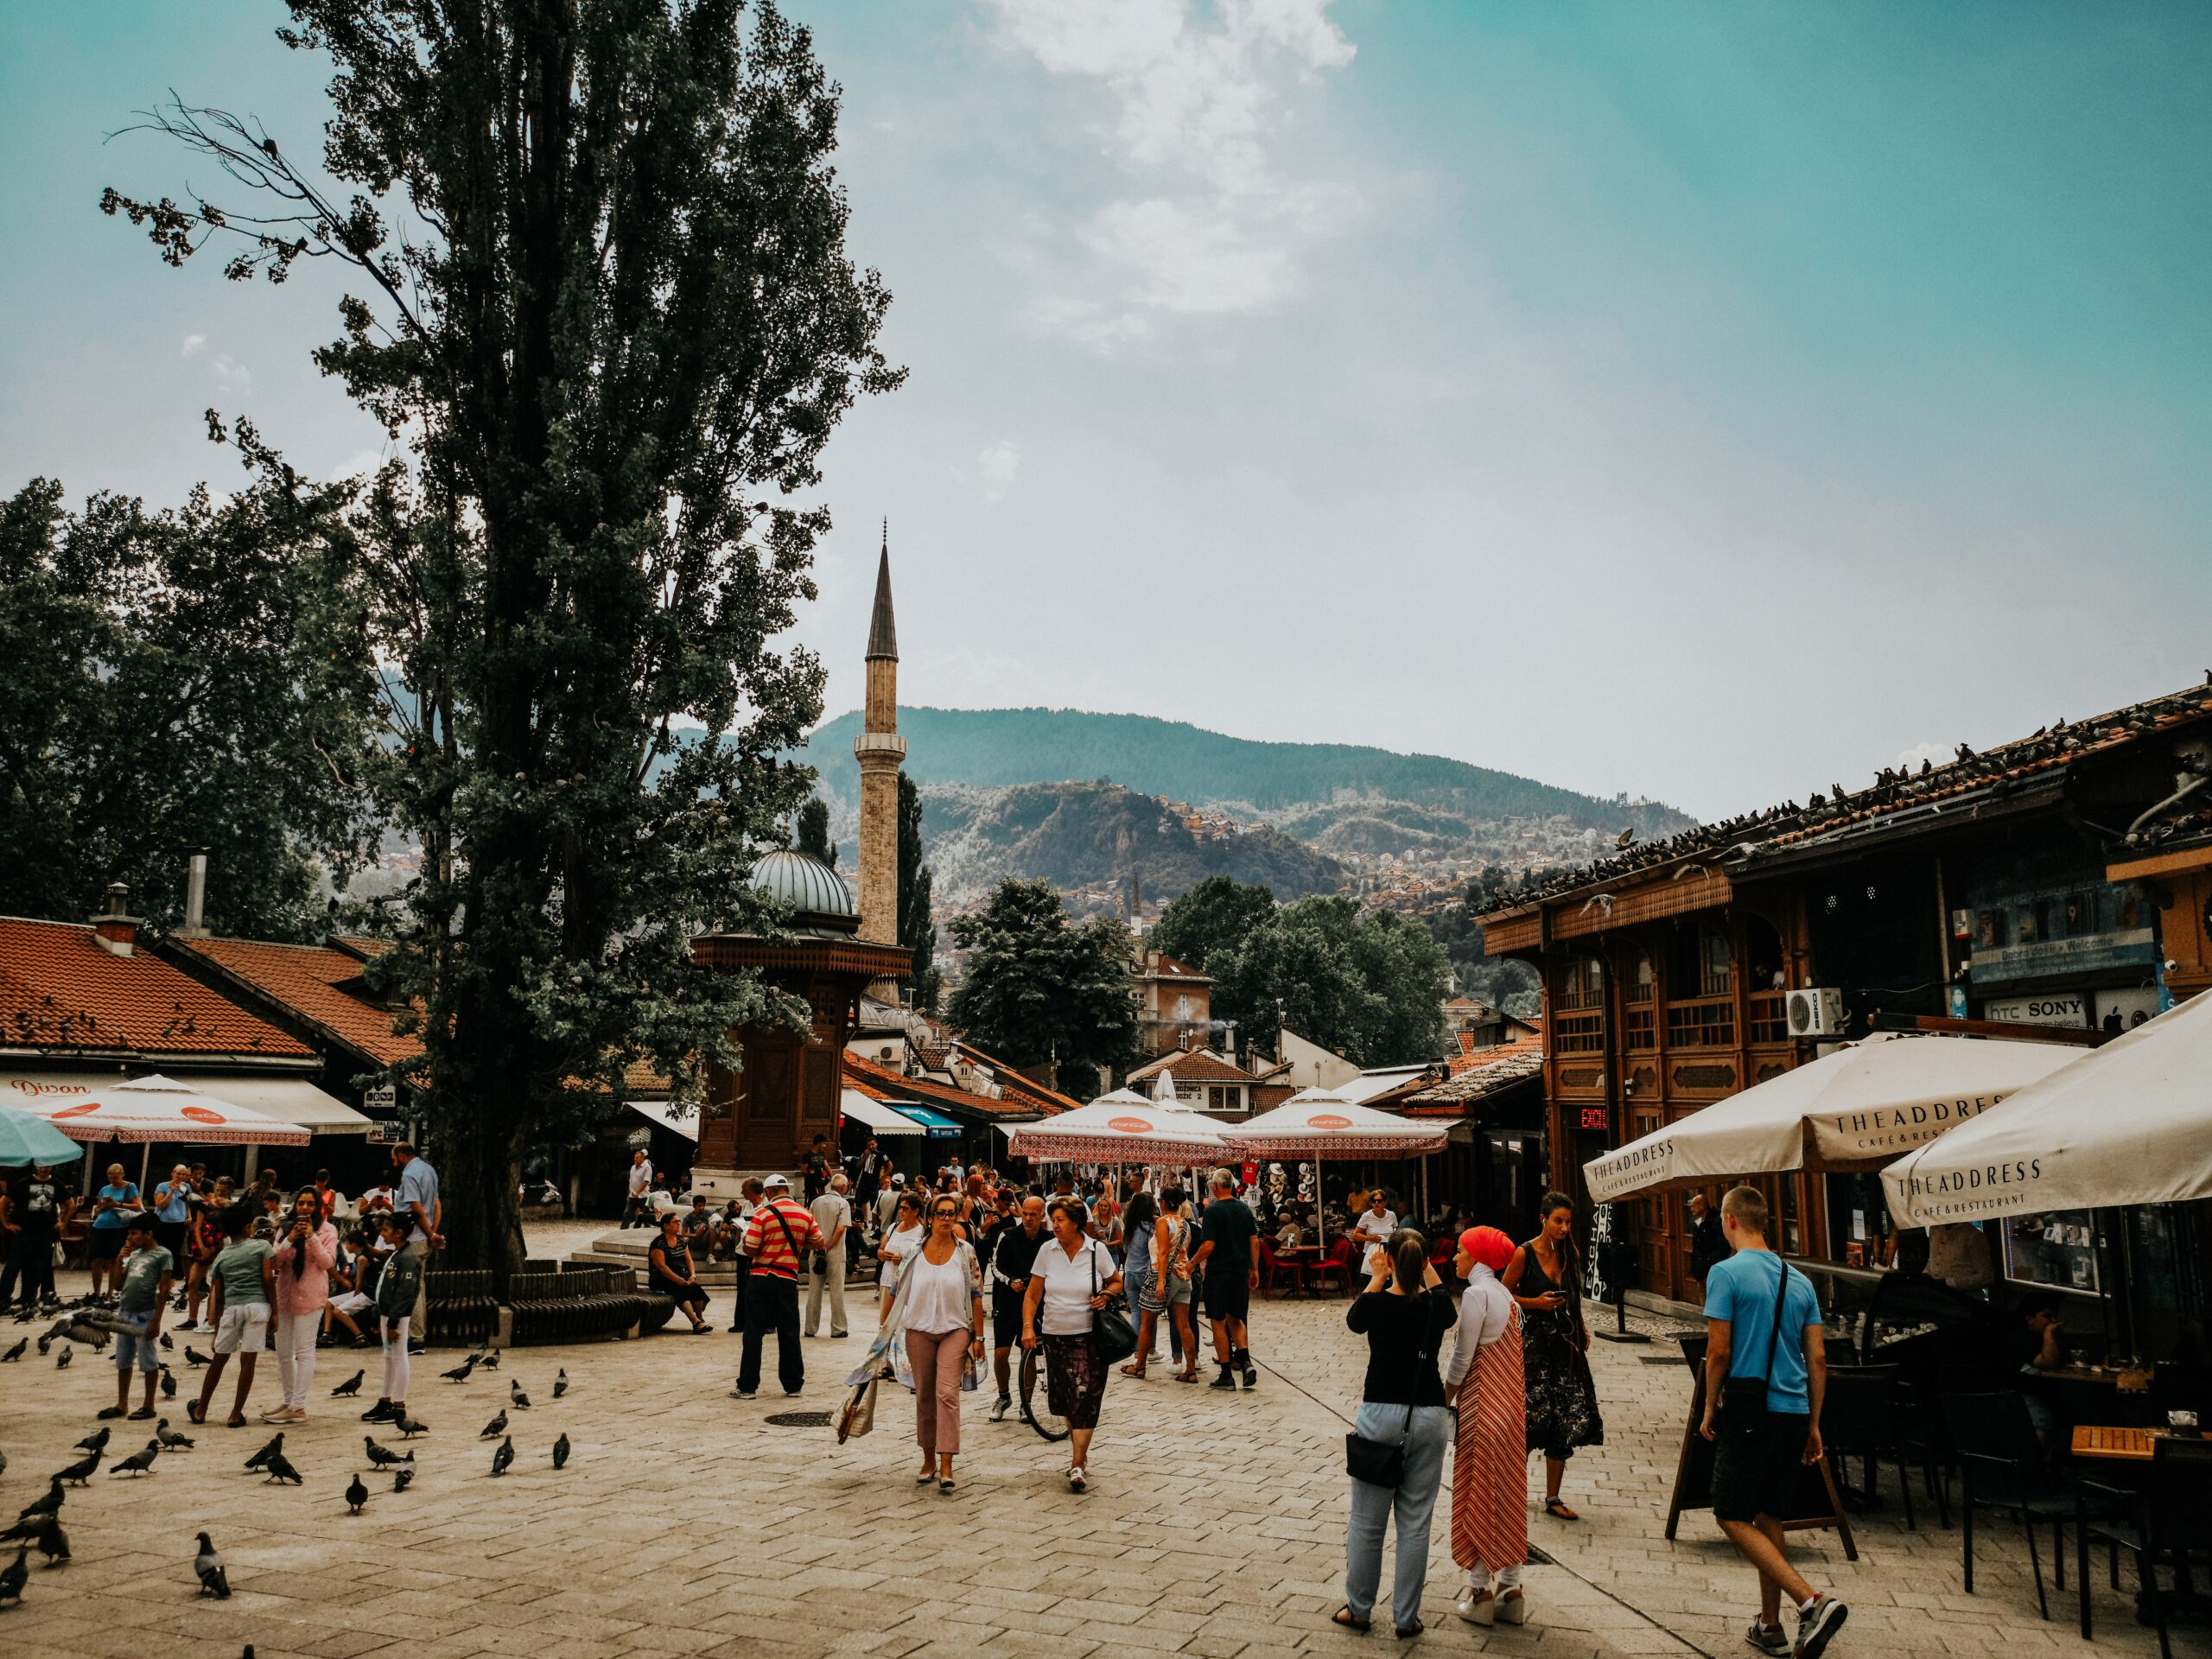 Sarajevo's old town, with hills in the background